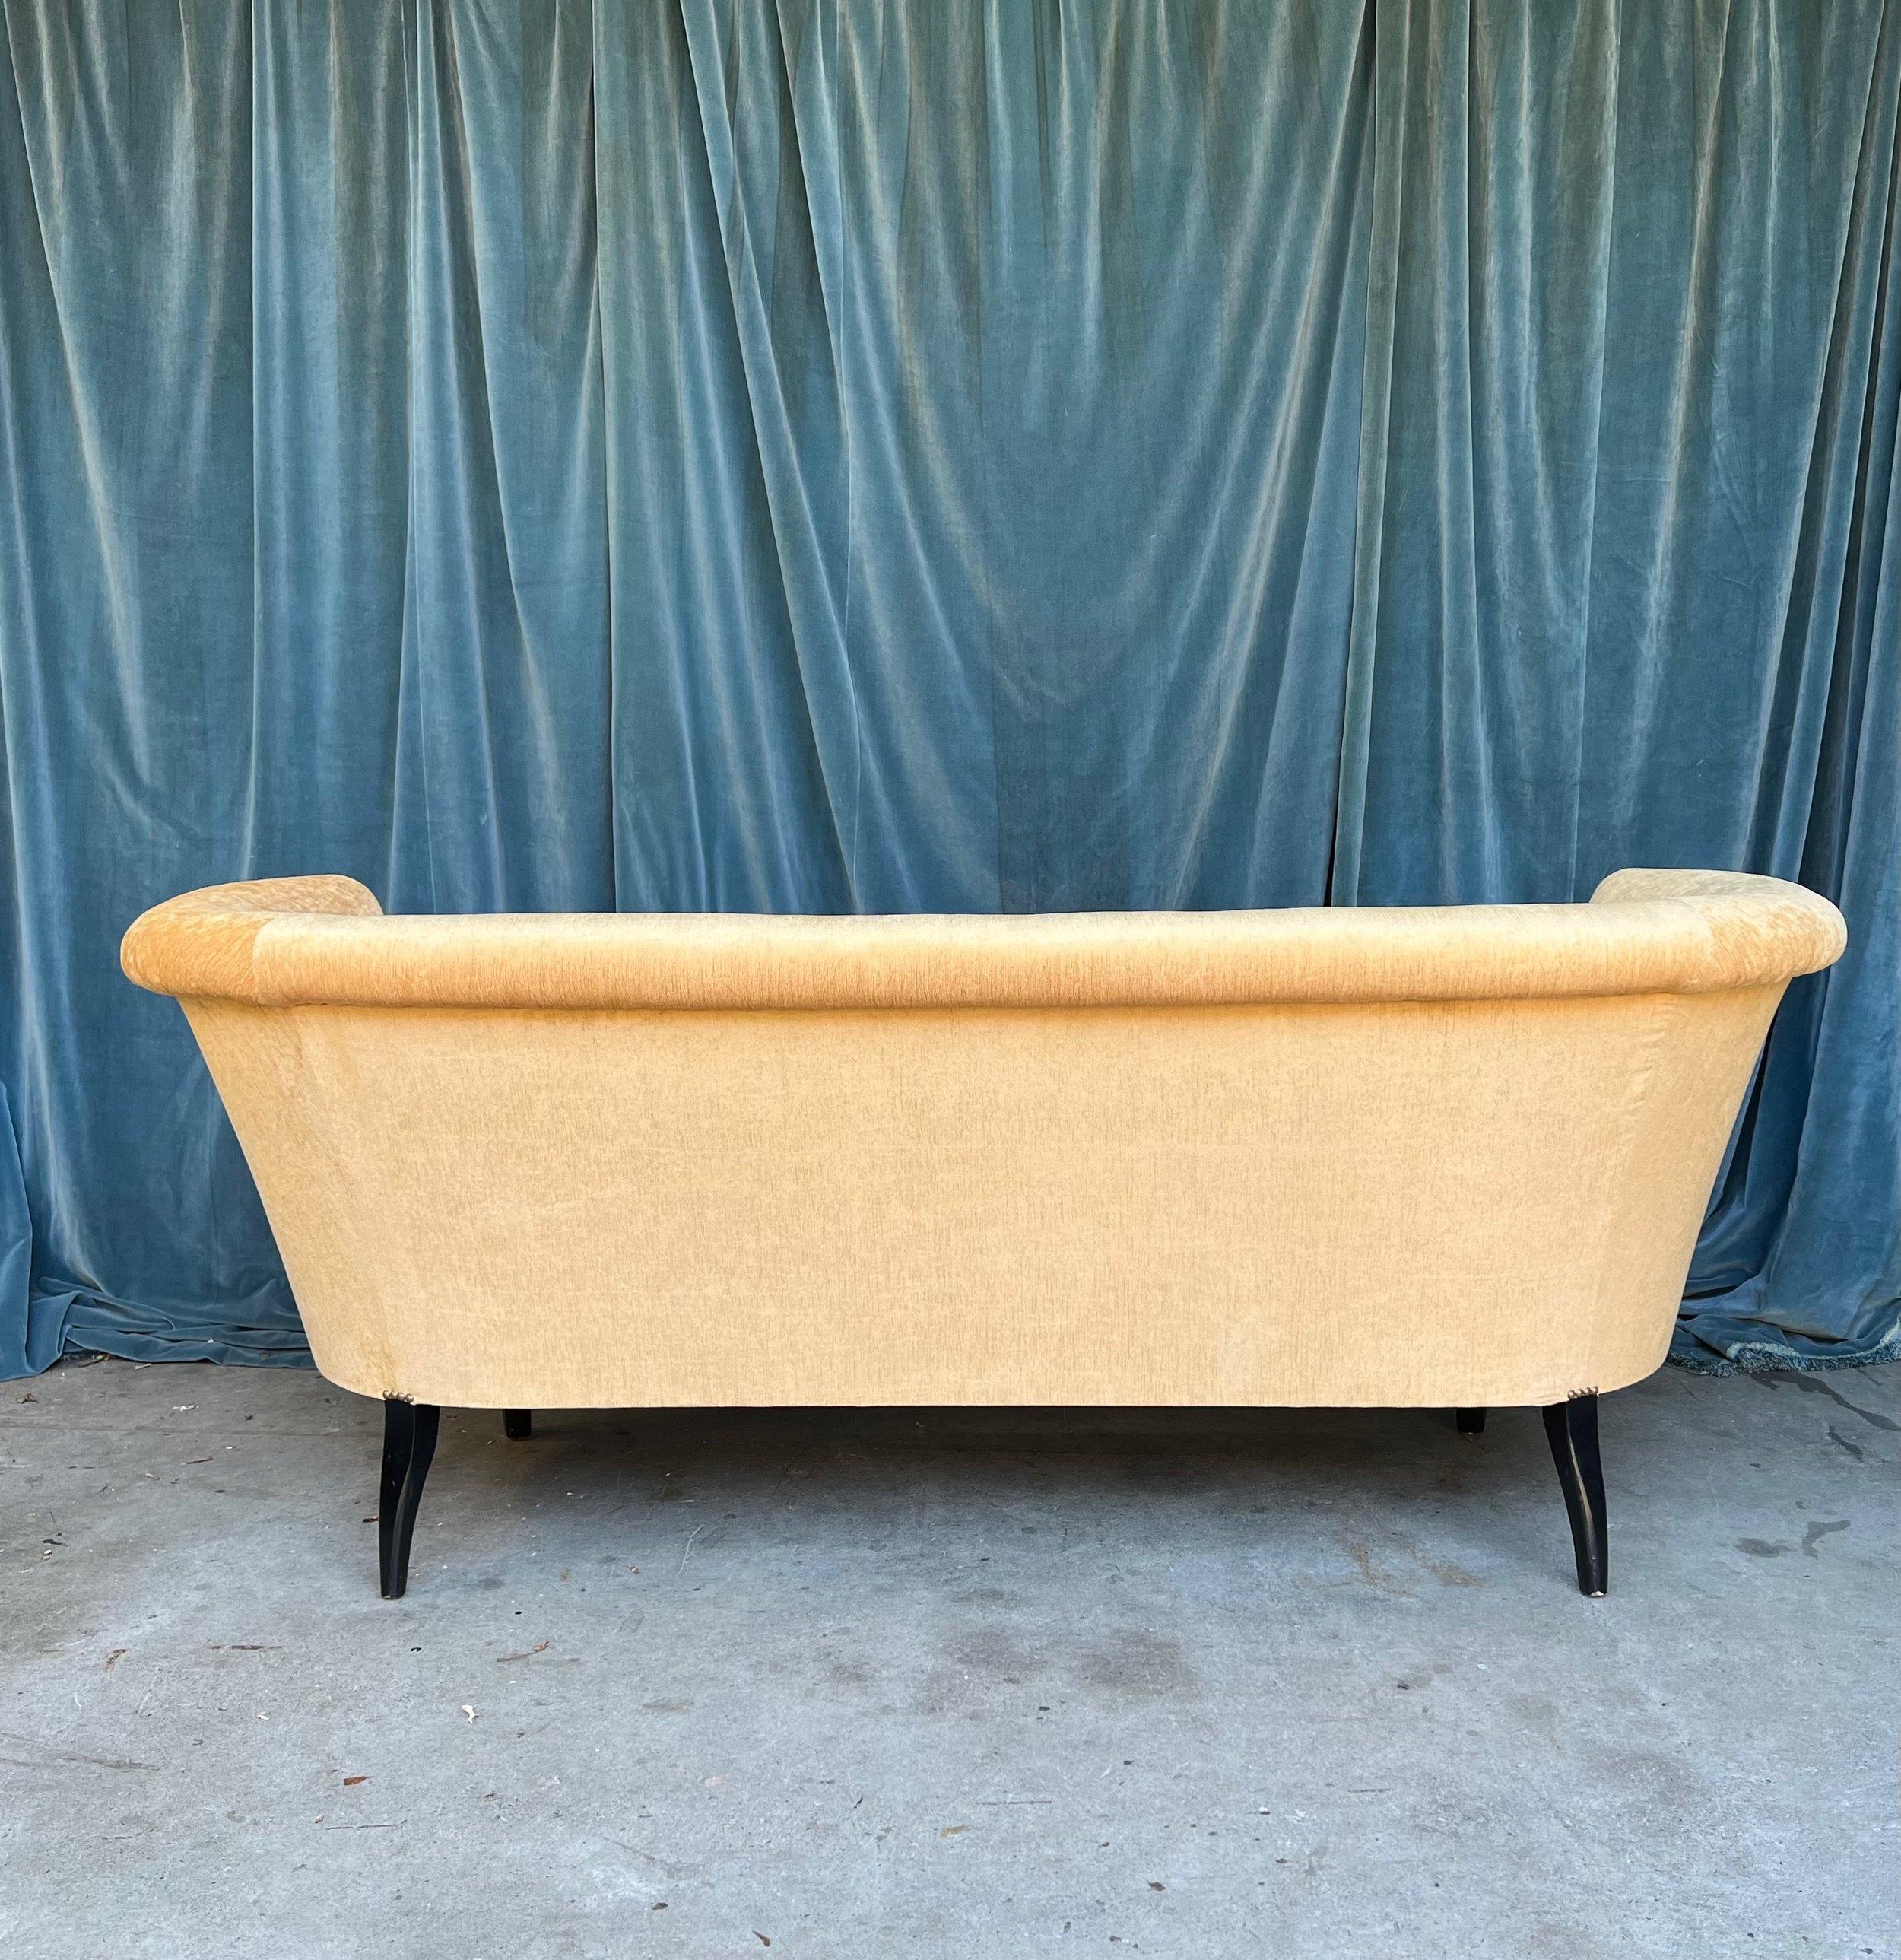 Custom Made Art Deco Style Sofa In Good Condition For Sale In Buchanan, NY